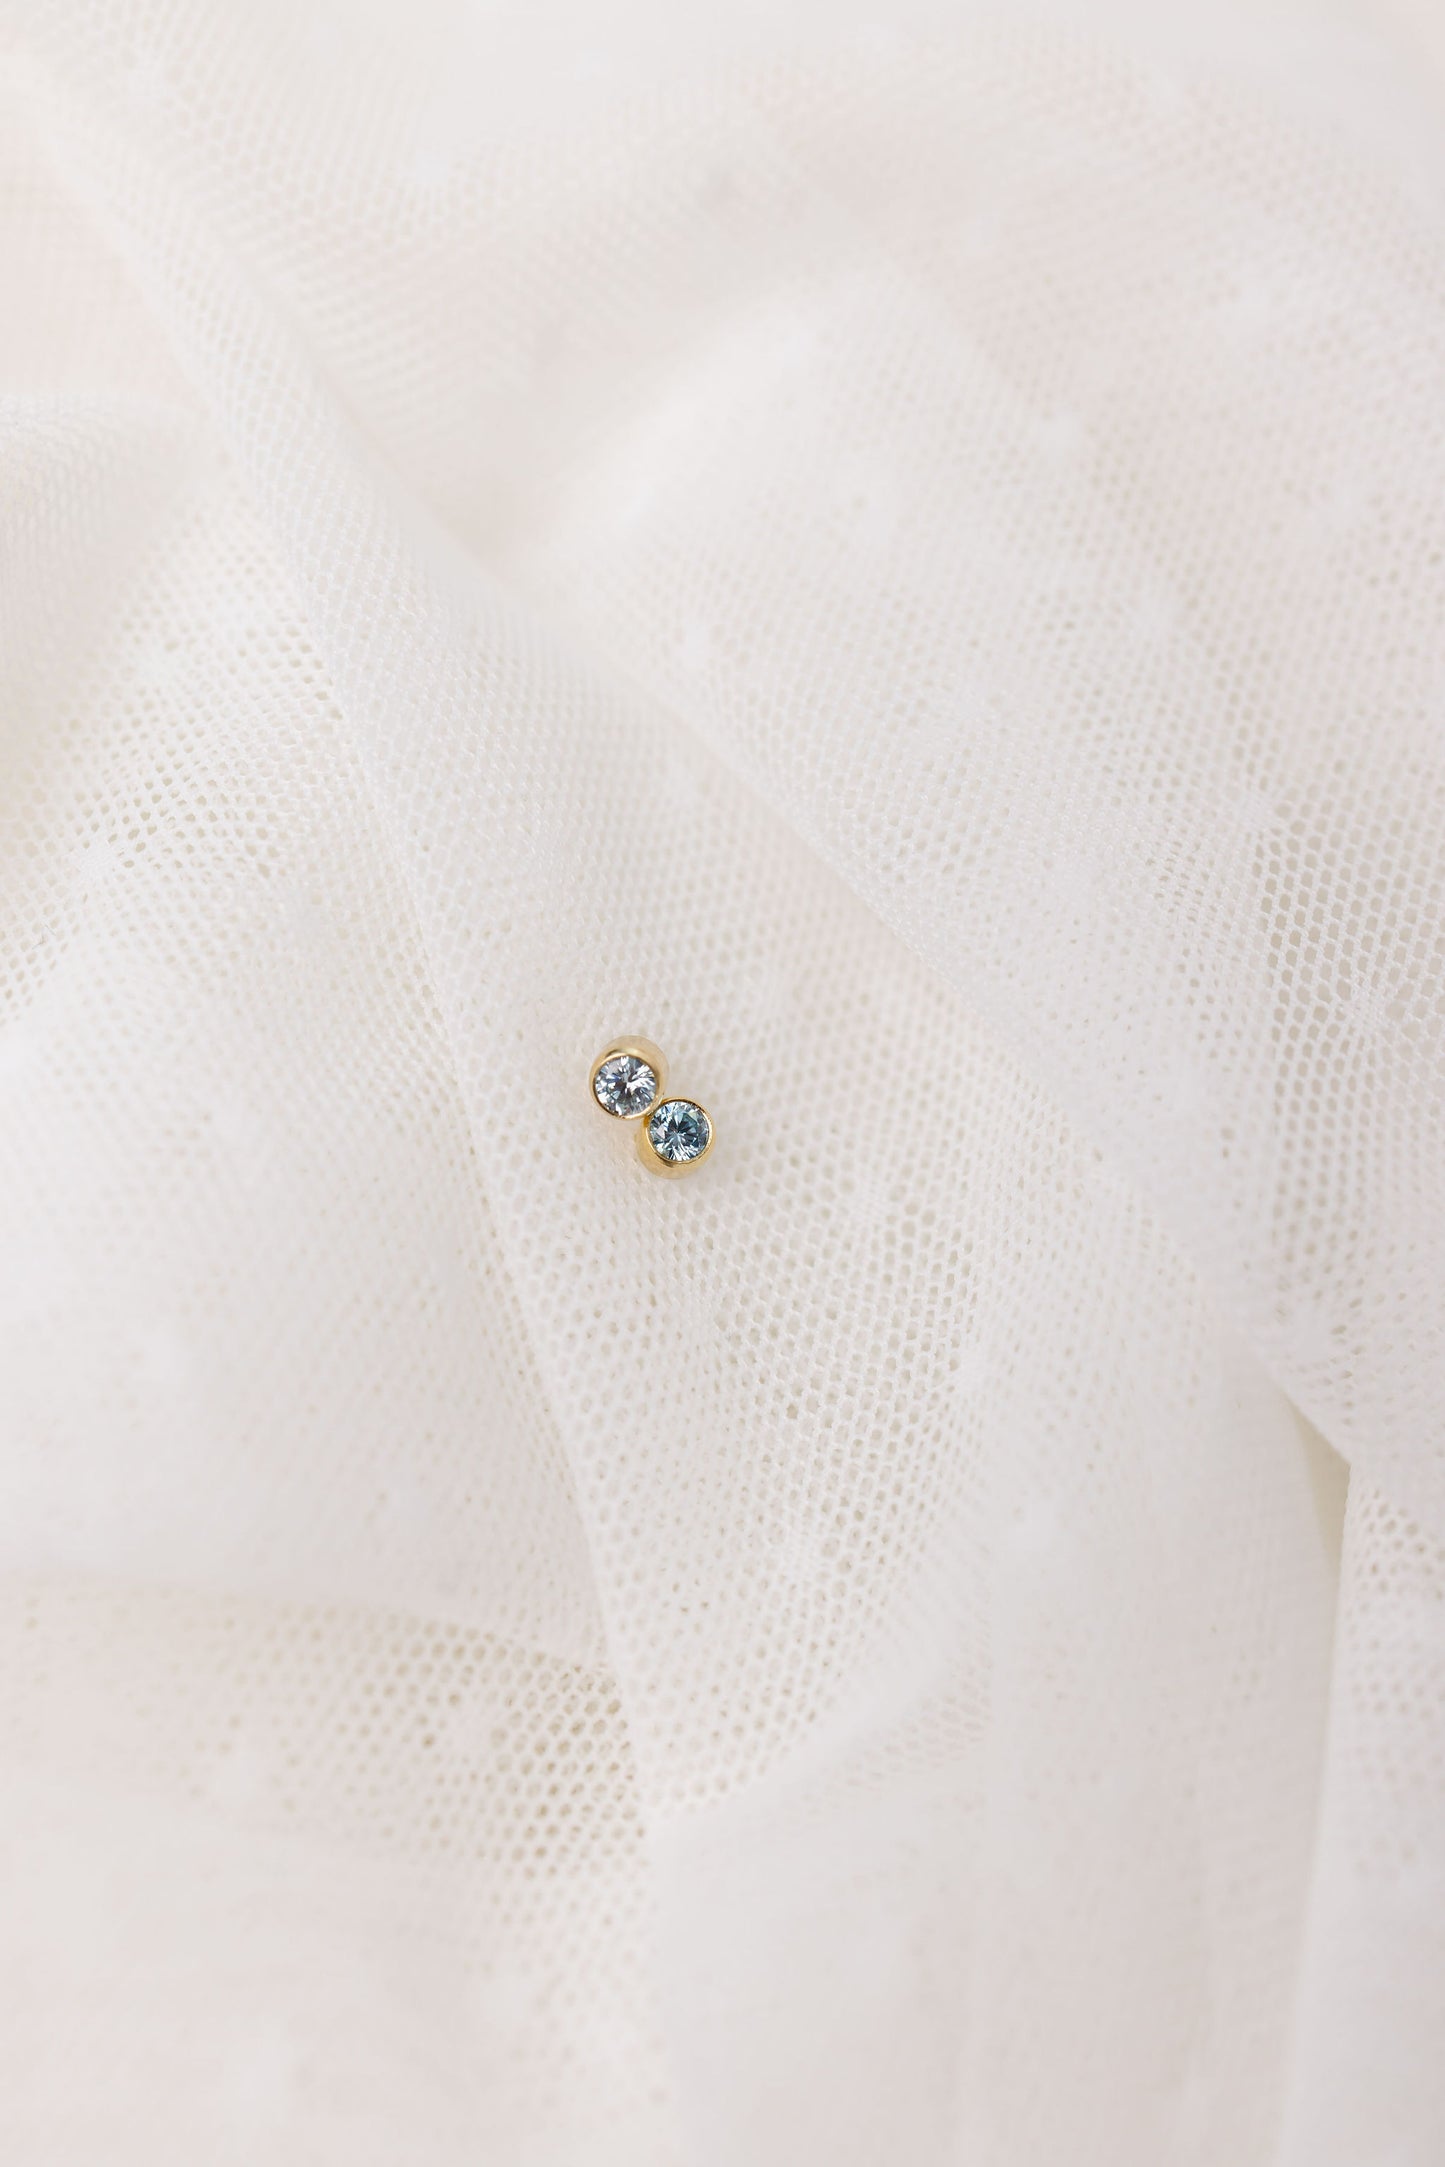 Load image into Gallery viewer, March Birthstone Stud Earrings
